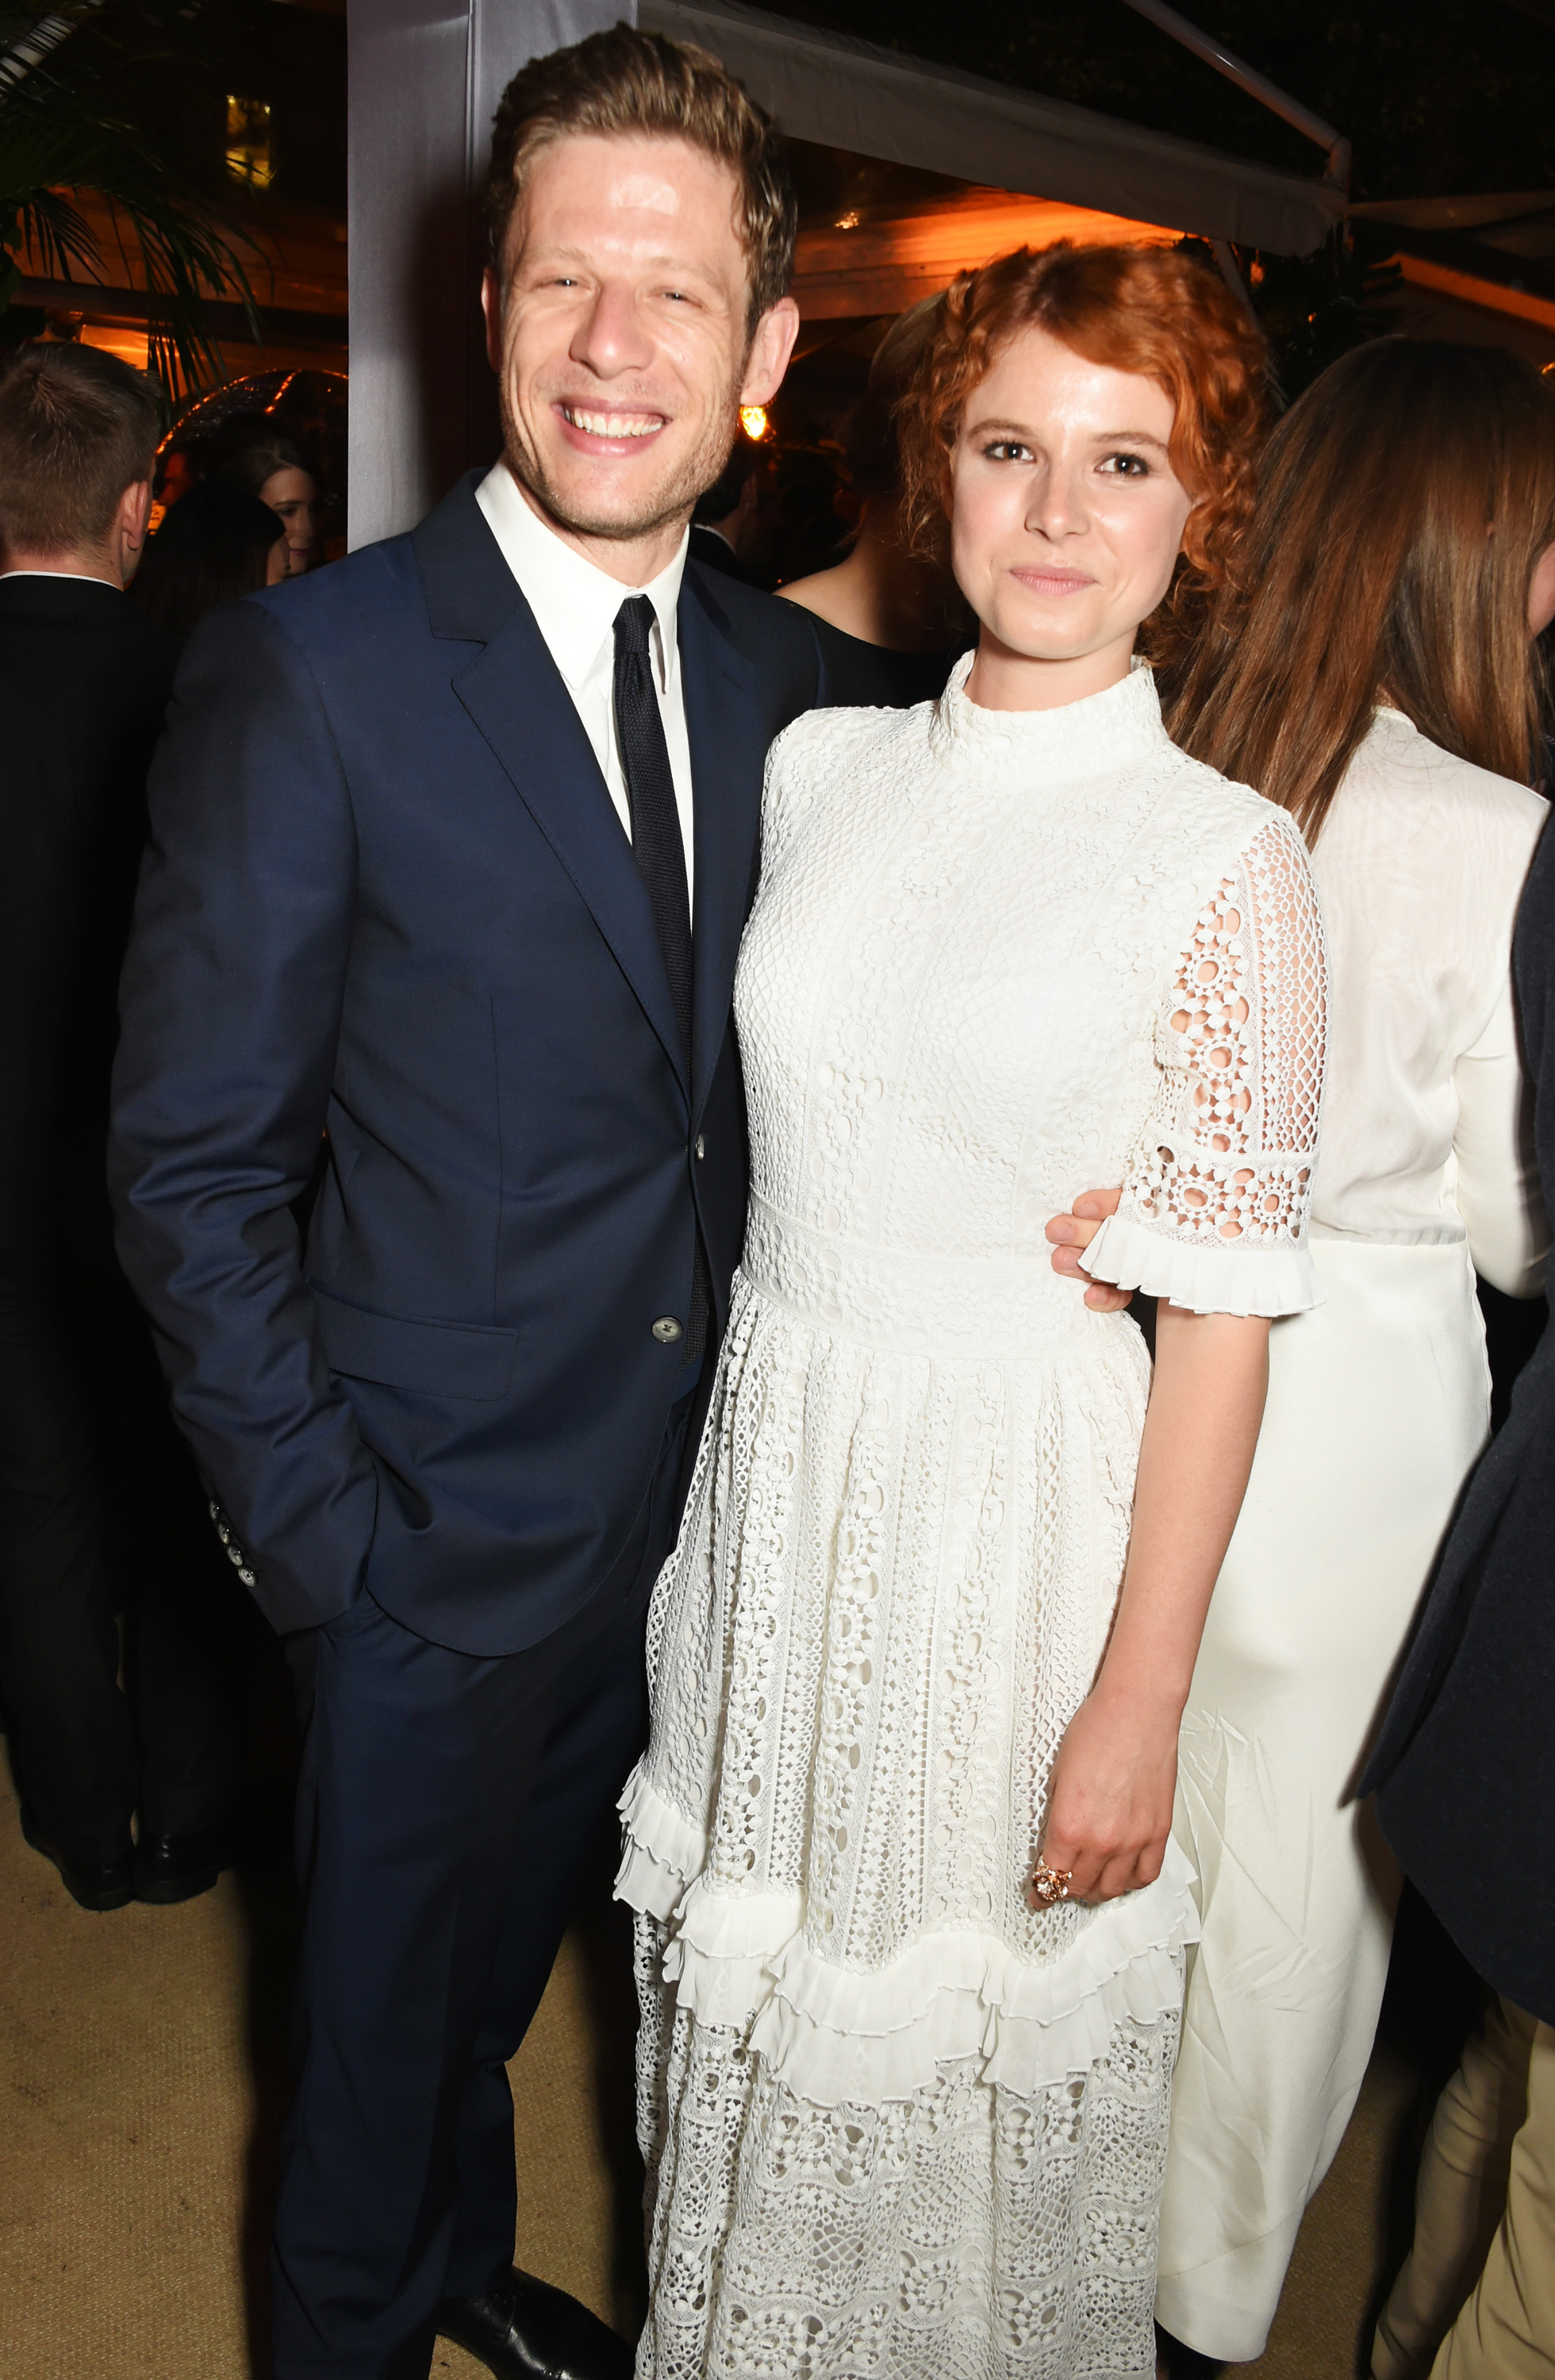 James Norton and Jessie Buckley attend the Glamour Women Of The Year Awards after party in Berkeley Square Gardens on June 7, 2016, in London, United Kingdom. | Source: Getty Images